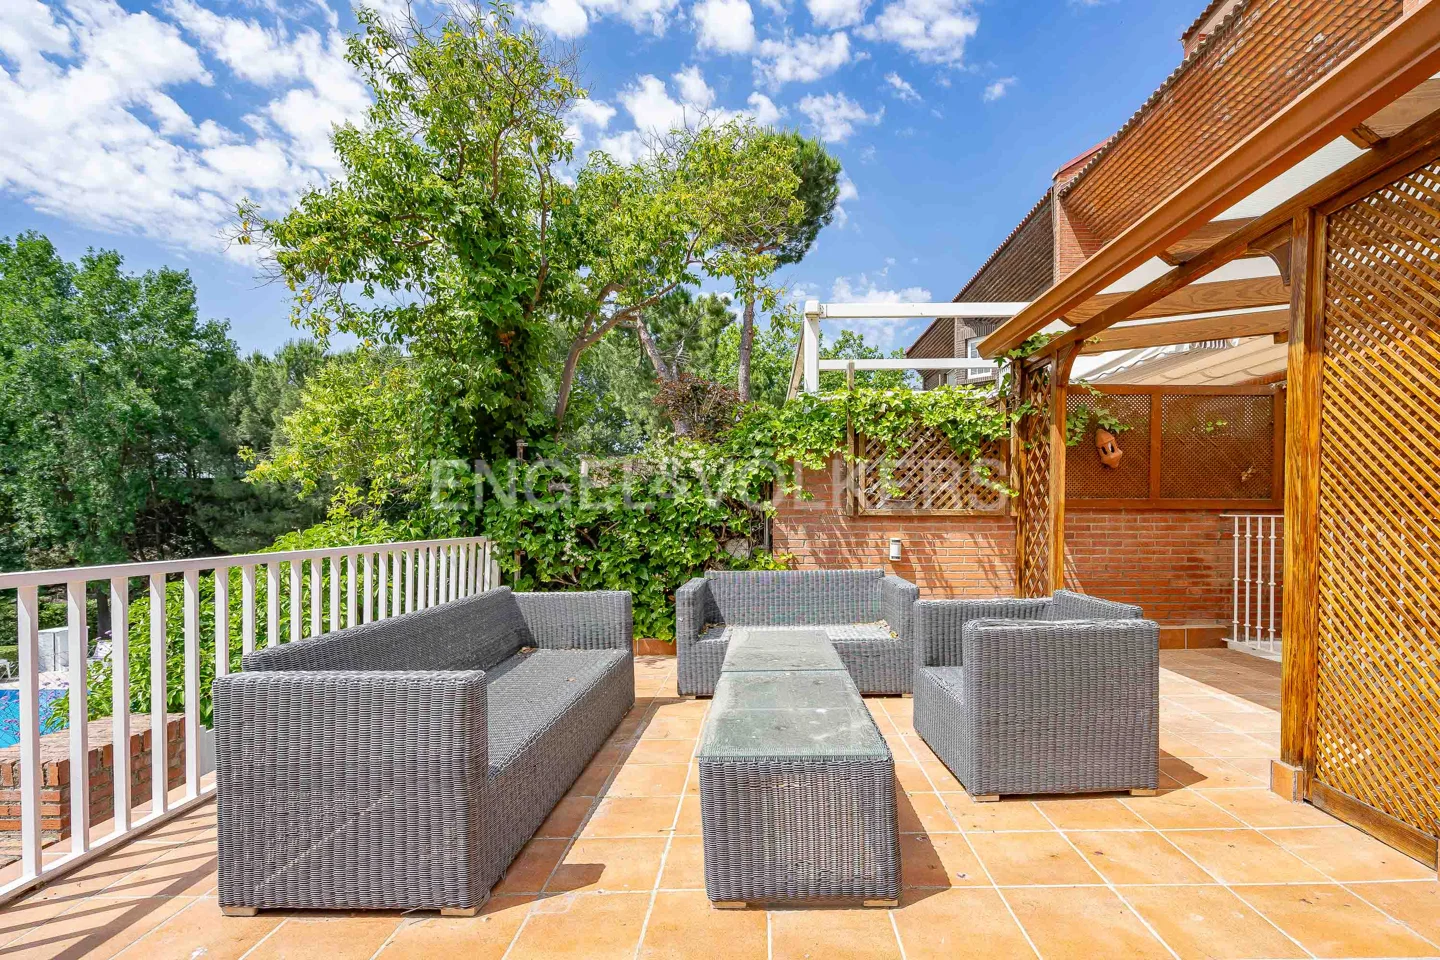 Semi-detached house for rent in Aravaca, a stone's throw from Madrid